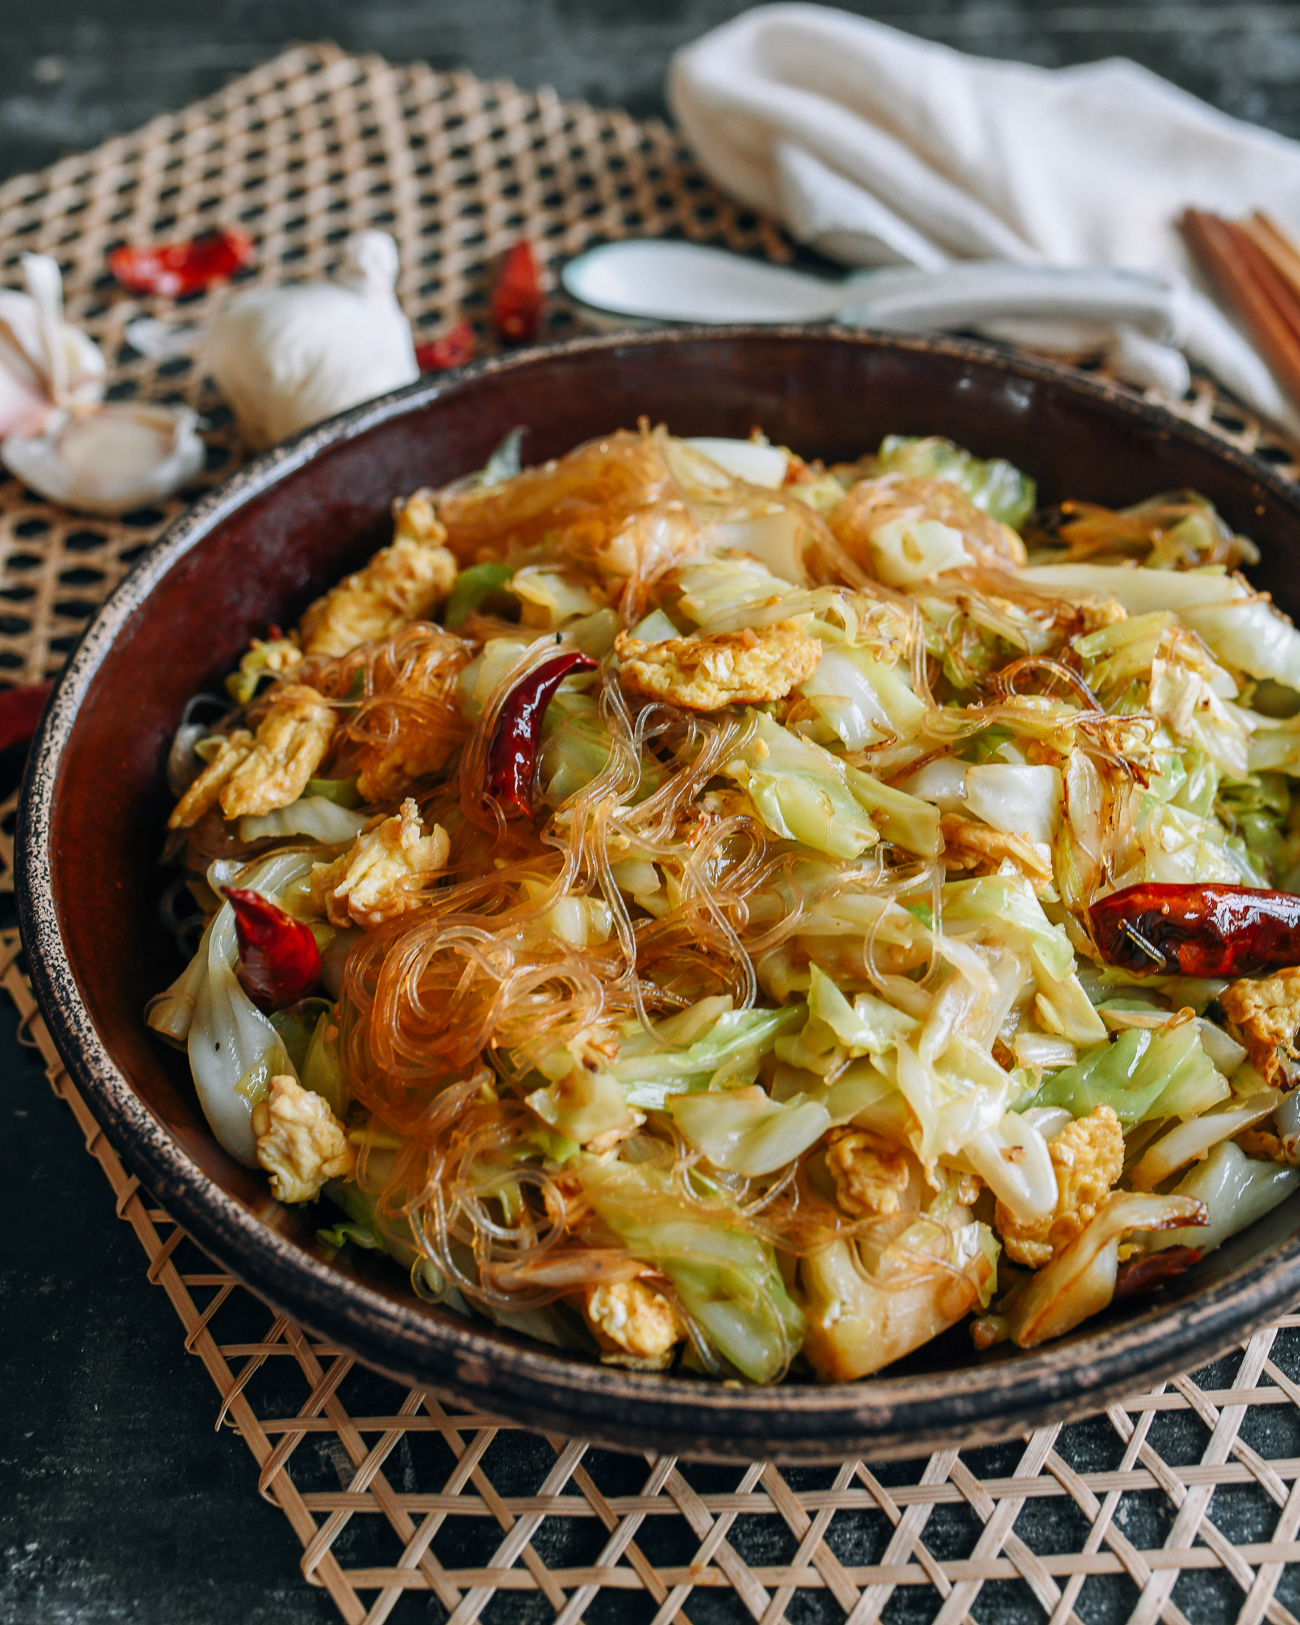 Cabbage Stir-fry with Eggs and Glass Noodles